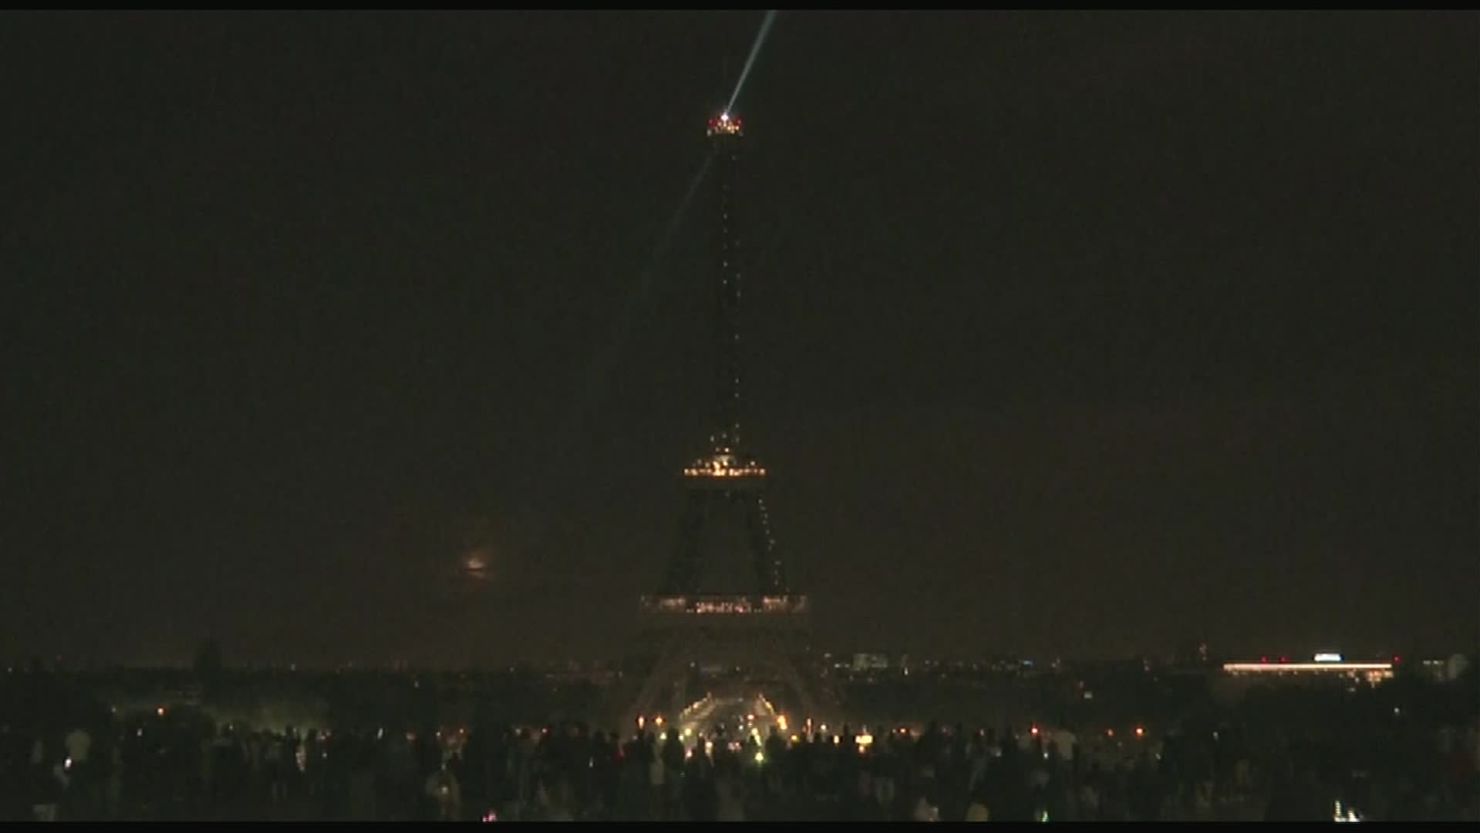 The Eiffel Tower went dark at midnight to pay tribute to the victims of the Sri Lanka bombings.